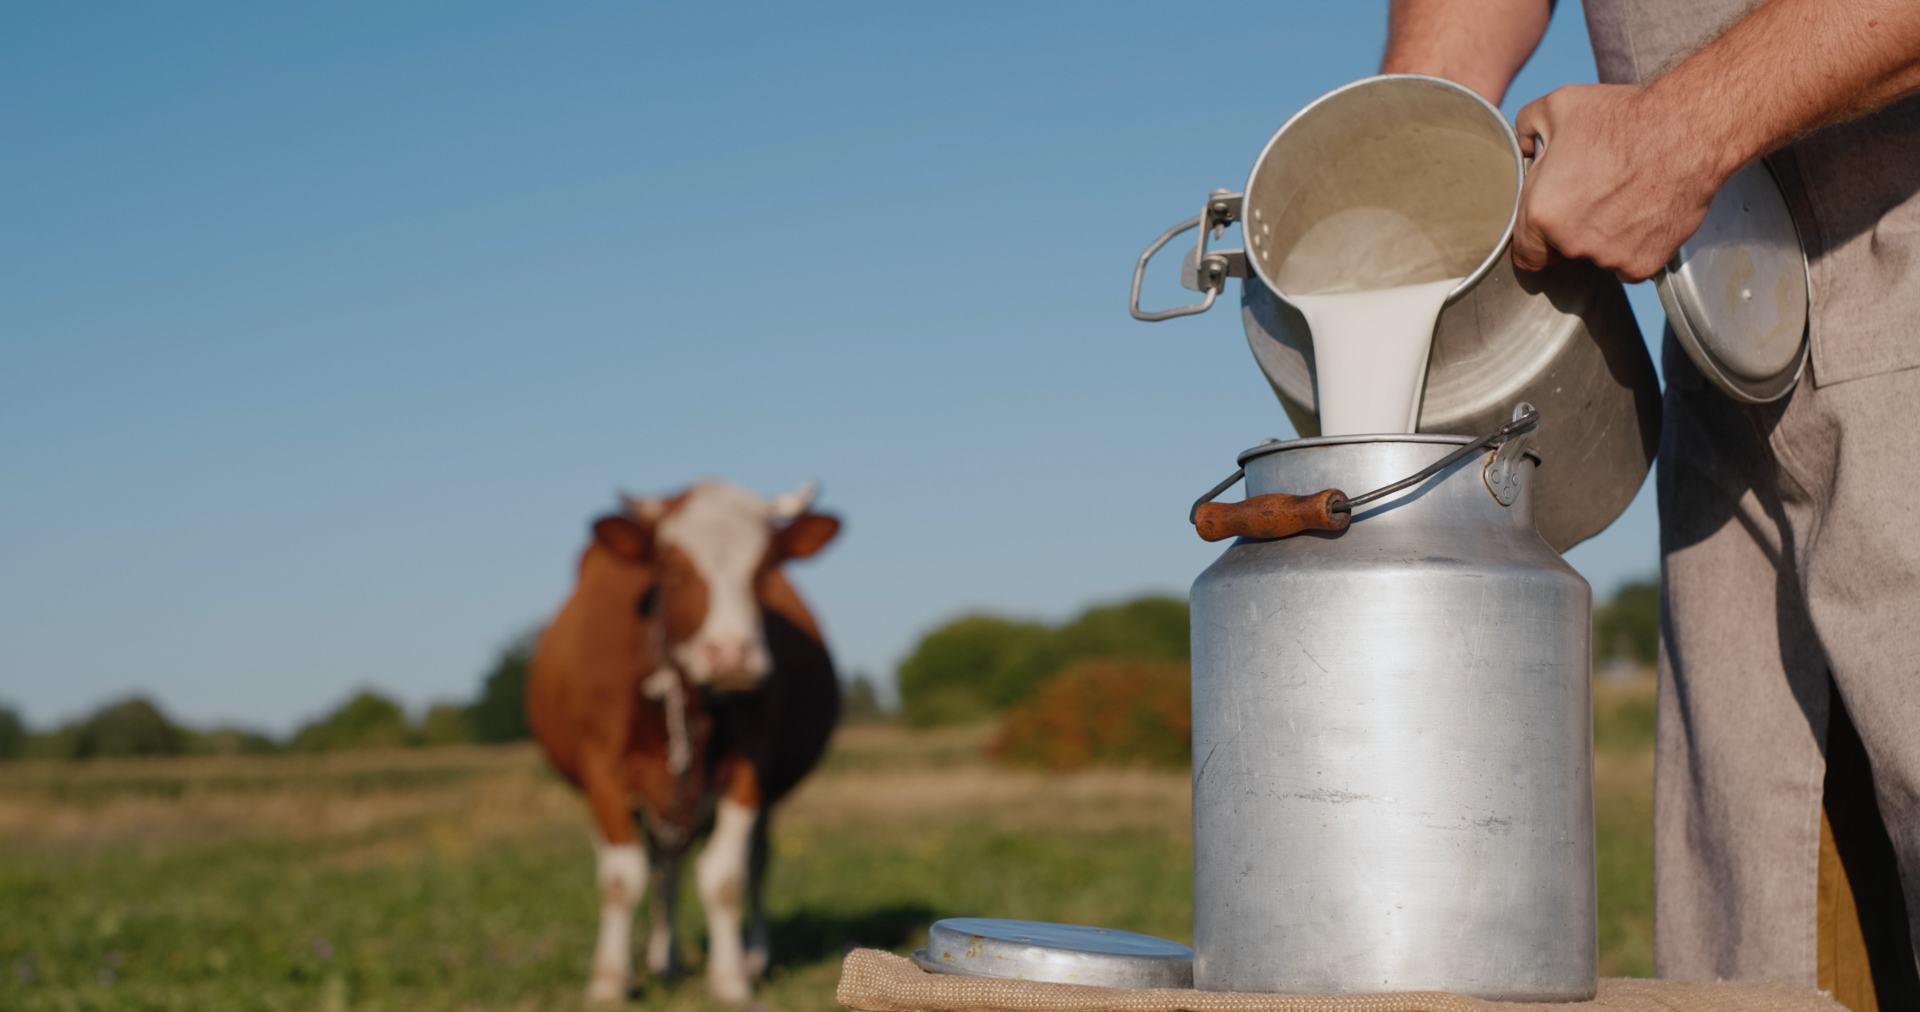 Farmer pours milk into can, in the background of a meadow with a cow